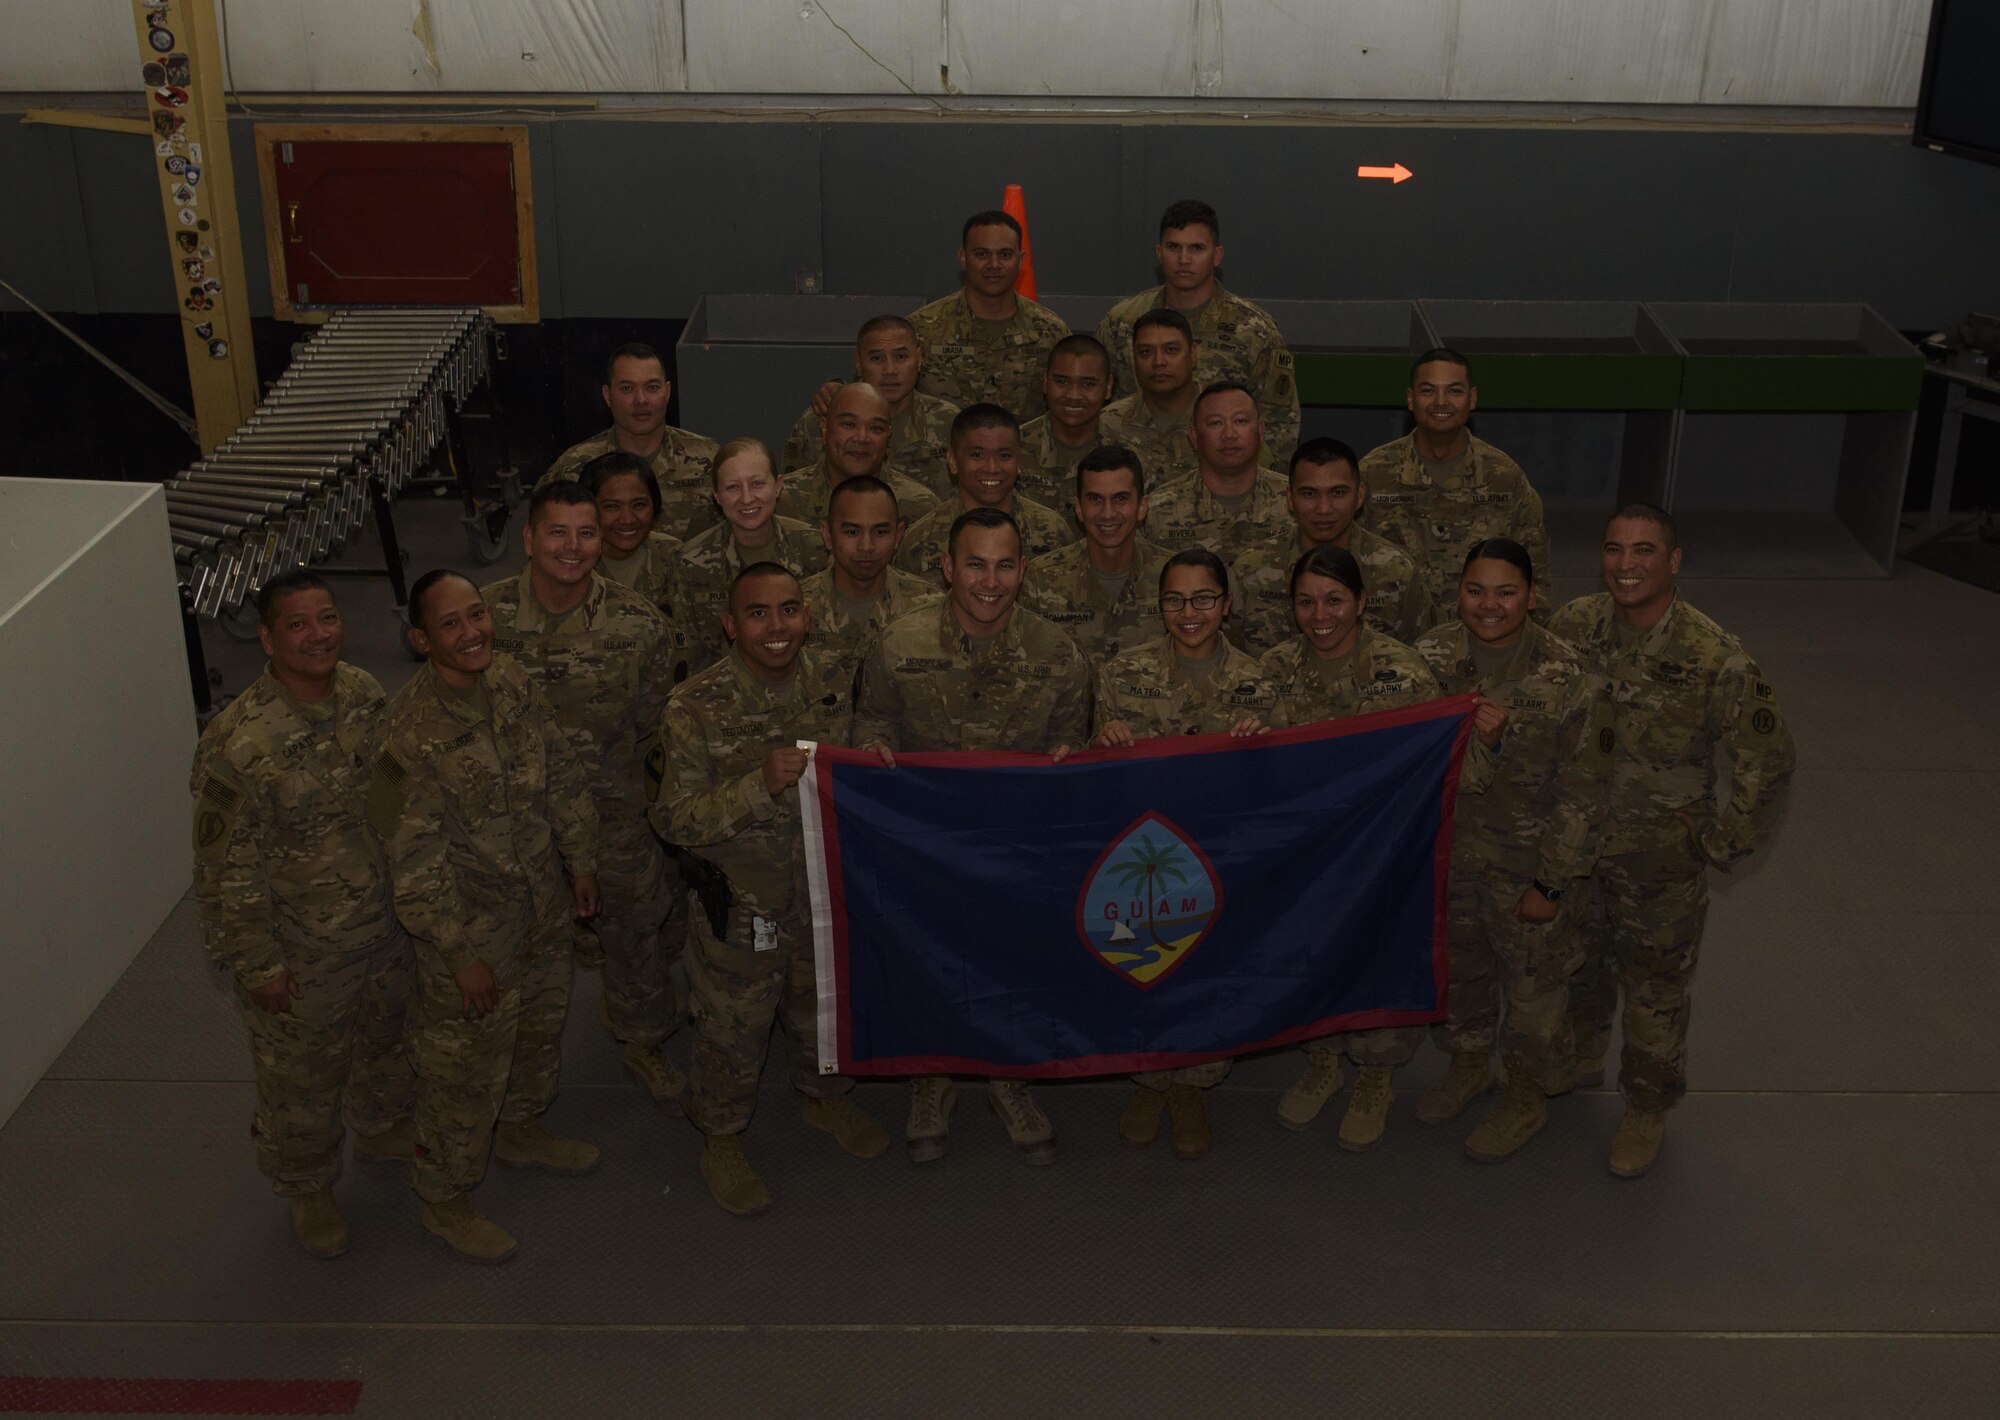 Soldiers assigned to the 368th Military Police Company, Detachment 3, from Guam pose for a photo on Bagram Airfield, Afghanistan, June 7, 2017. Detachment 3 has been conducting the customs mission on Bagram and Kandahar Airfields. Just about everyone supporting the Resolute Support and Operation Freedom’s Sentinel mission in Afghanistan has passed the careful inspections of this vigilant team. (U.S. Air Force photo by Staff Sgt. Benjamin Gonsier)